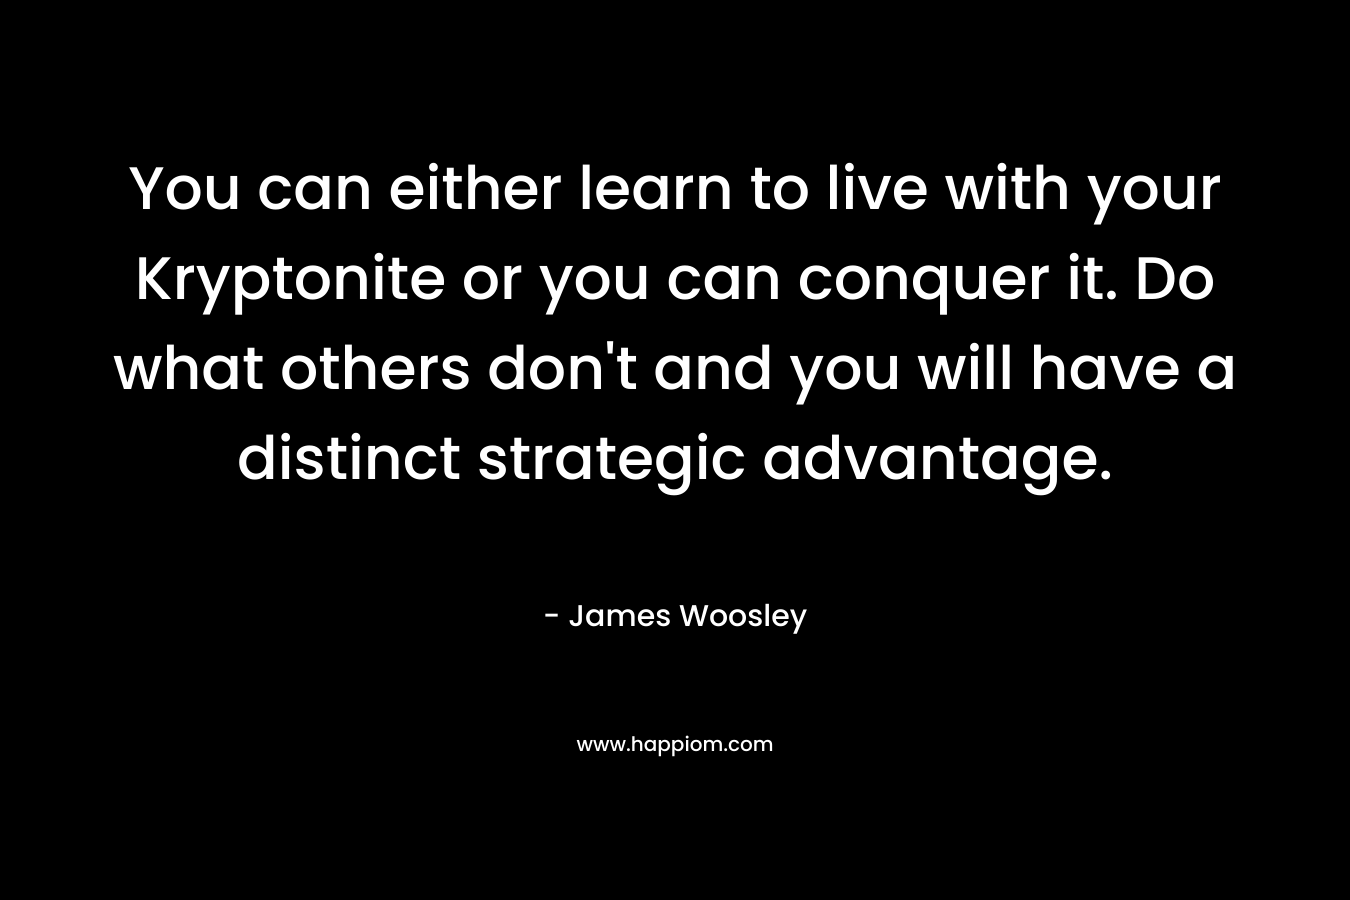 You can either learn to live with your Kryptonite or you can conquer it. Do what others don't and you will have a distinct strategic advantage.